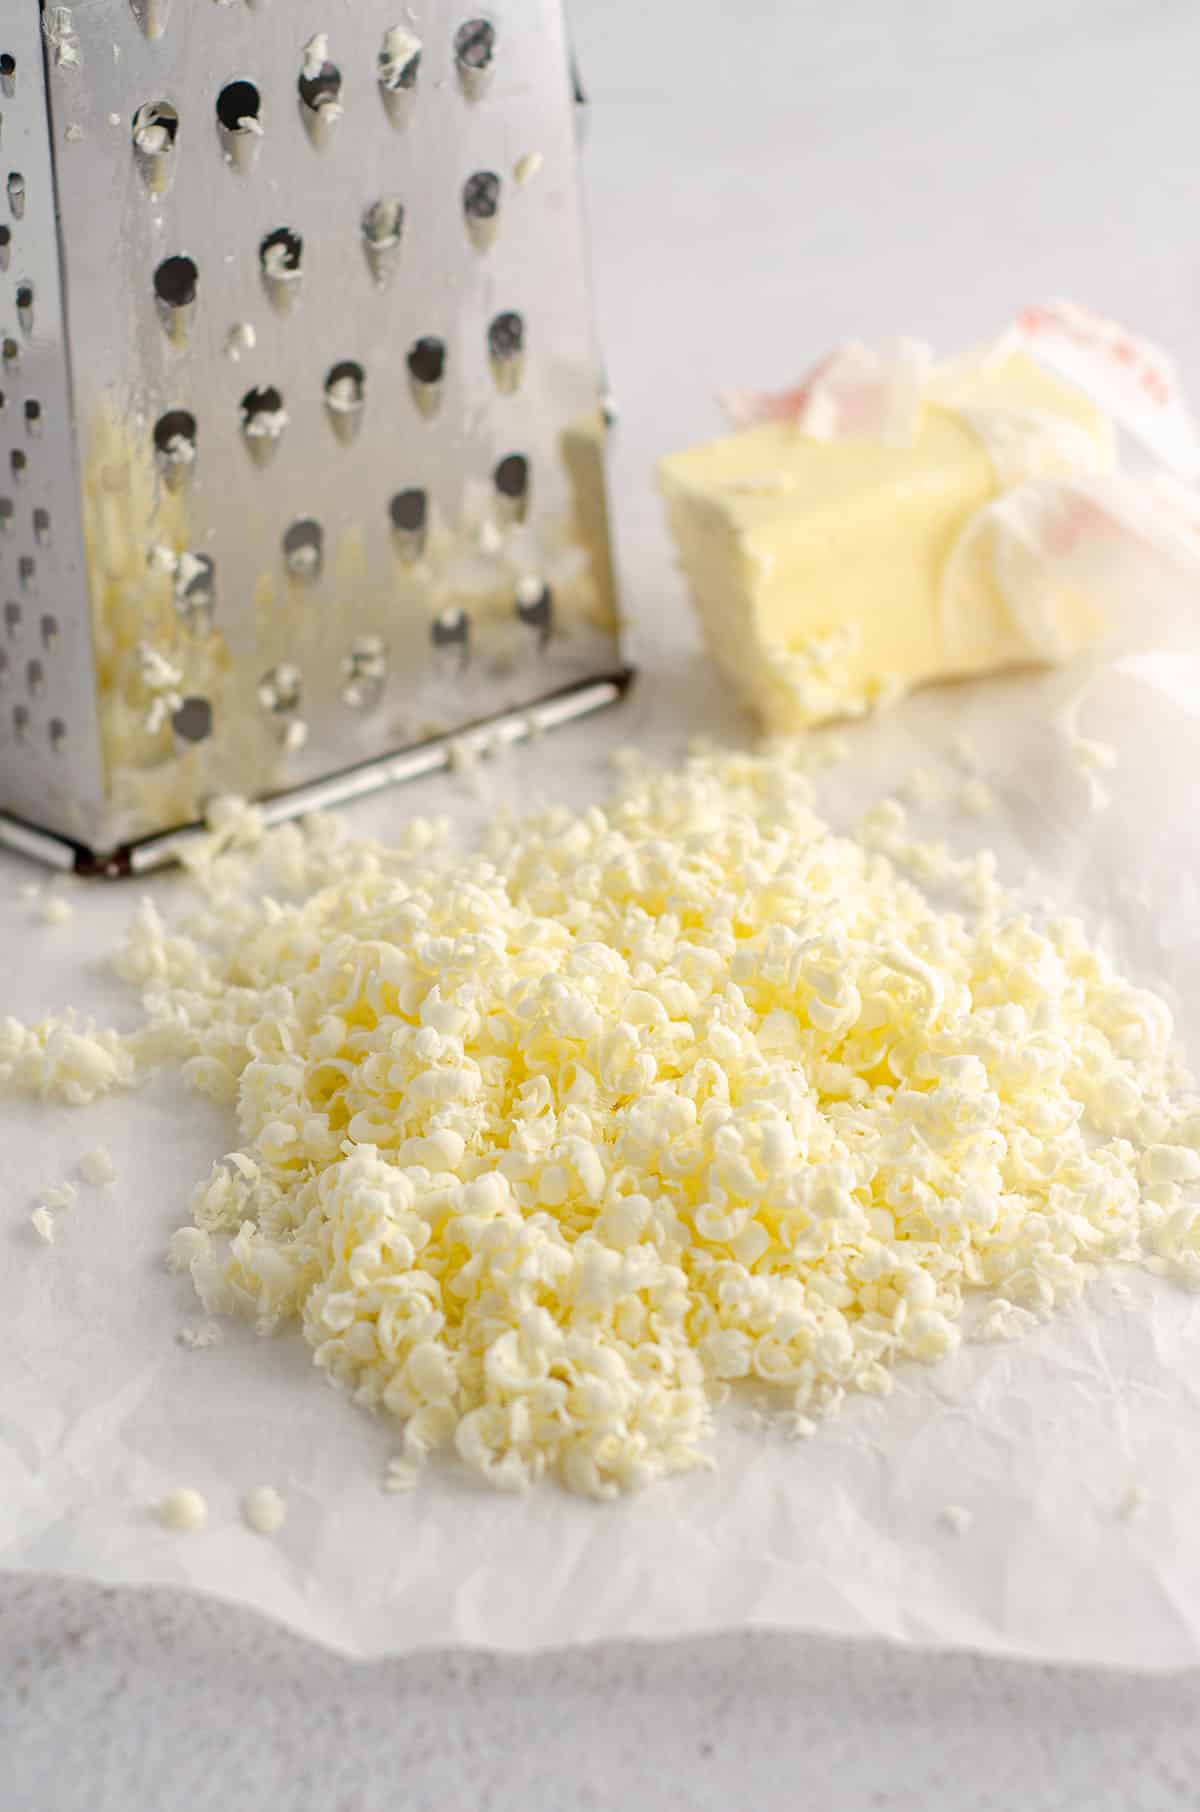 frozen butter grated with a box grater in background